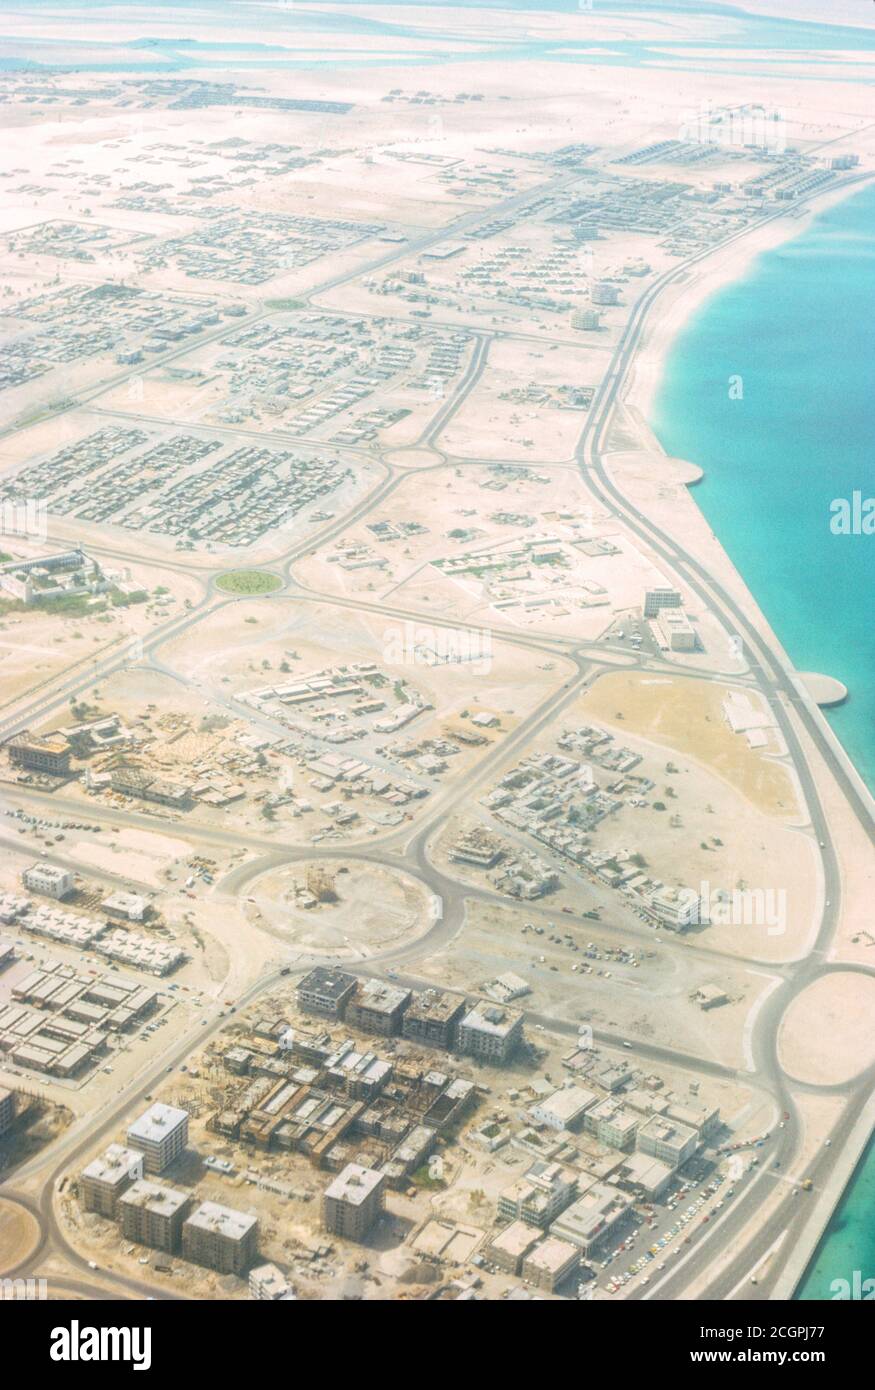 Abu Dhabi, UAE, Begins its Modern Development.  Aerial View photographed March 1972. Stock Photo